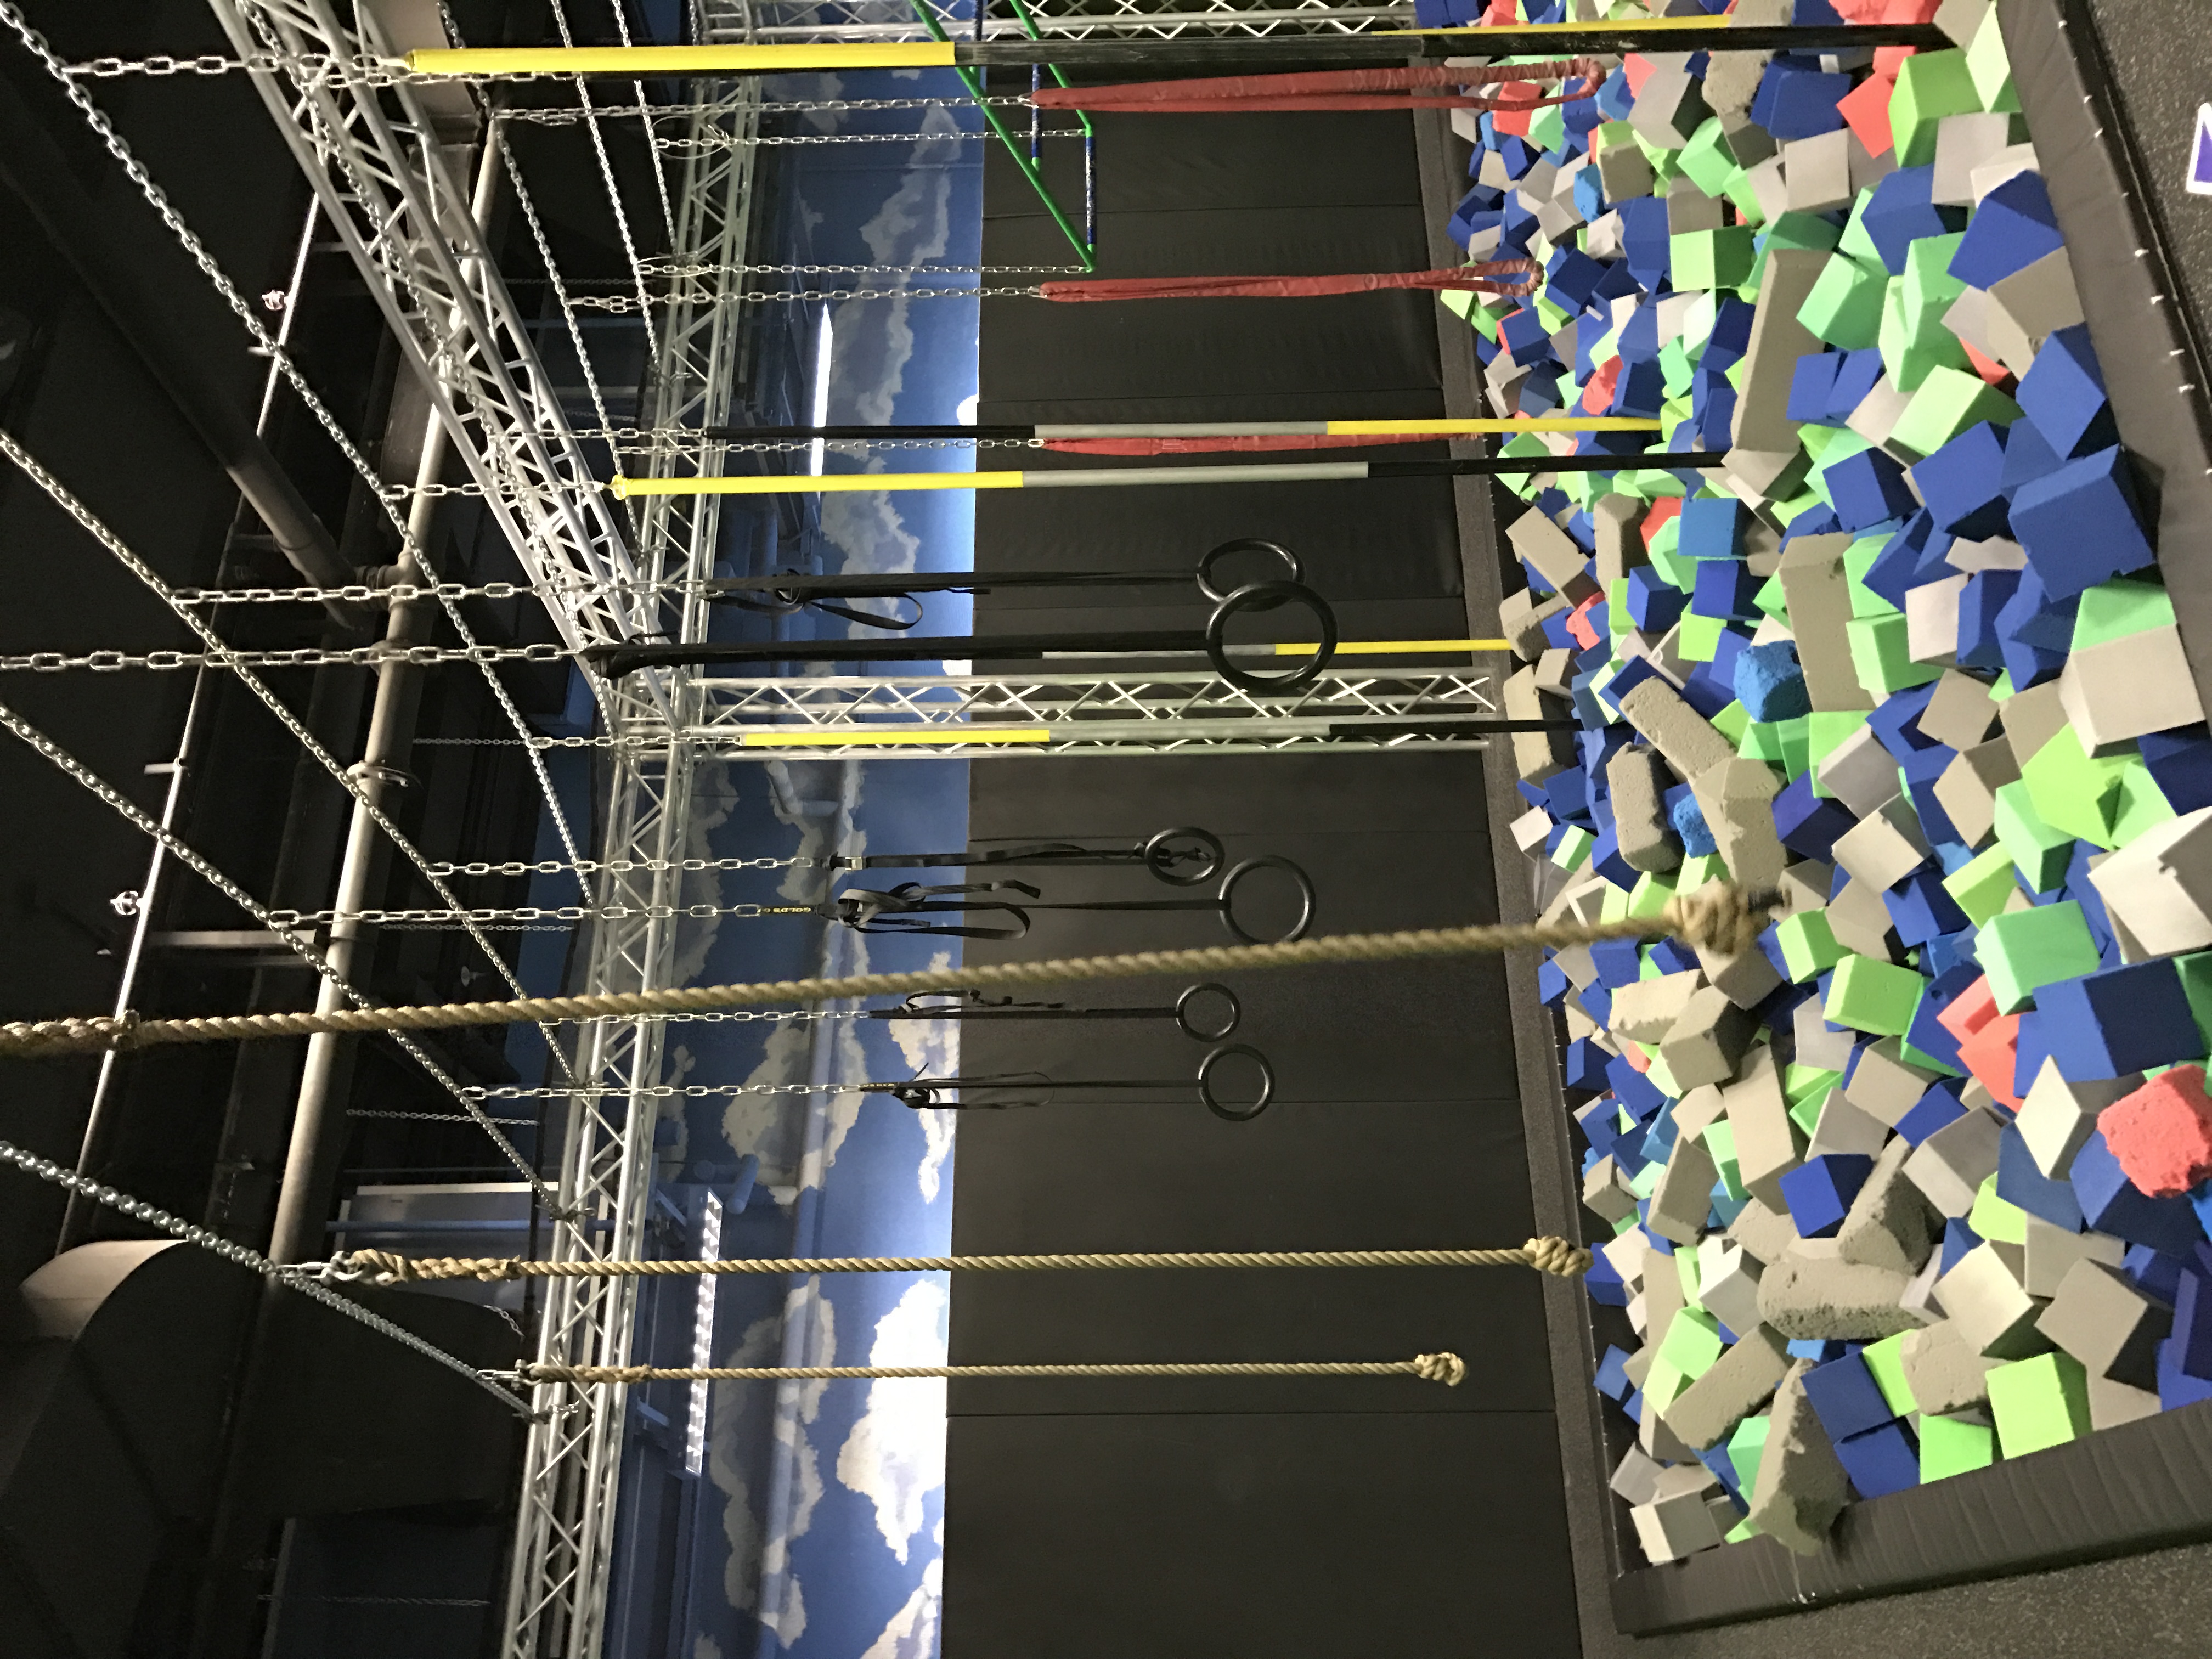 Why is indoor playground important?